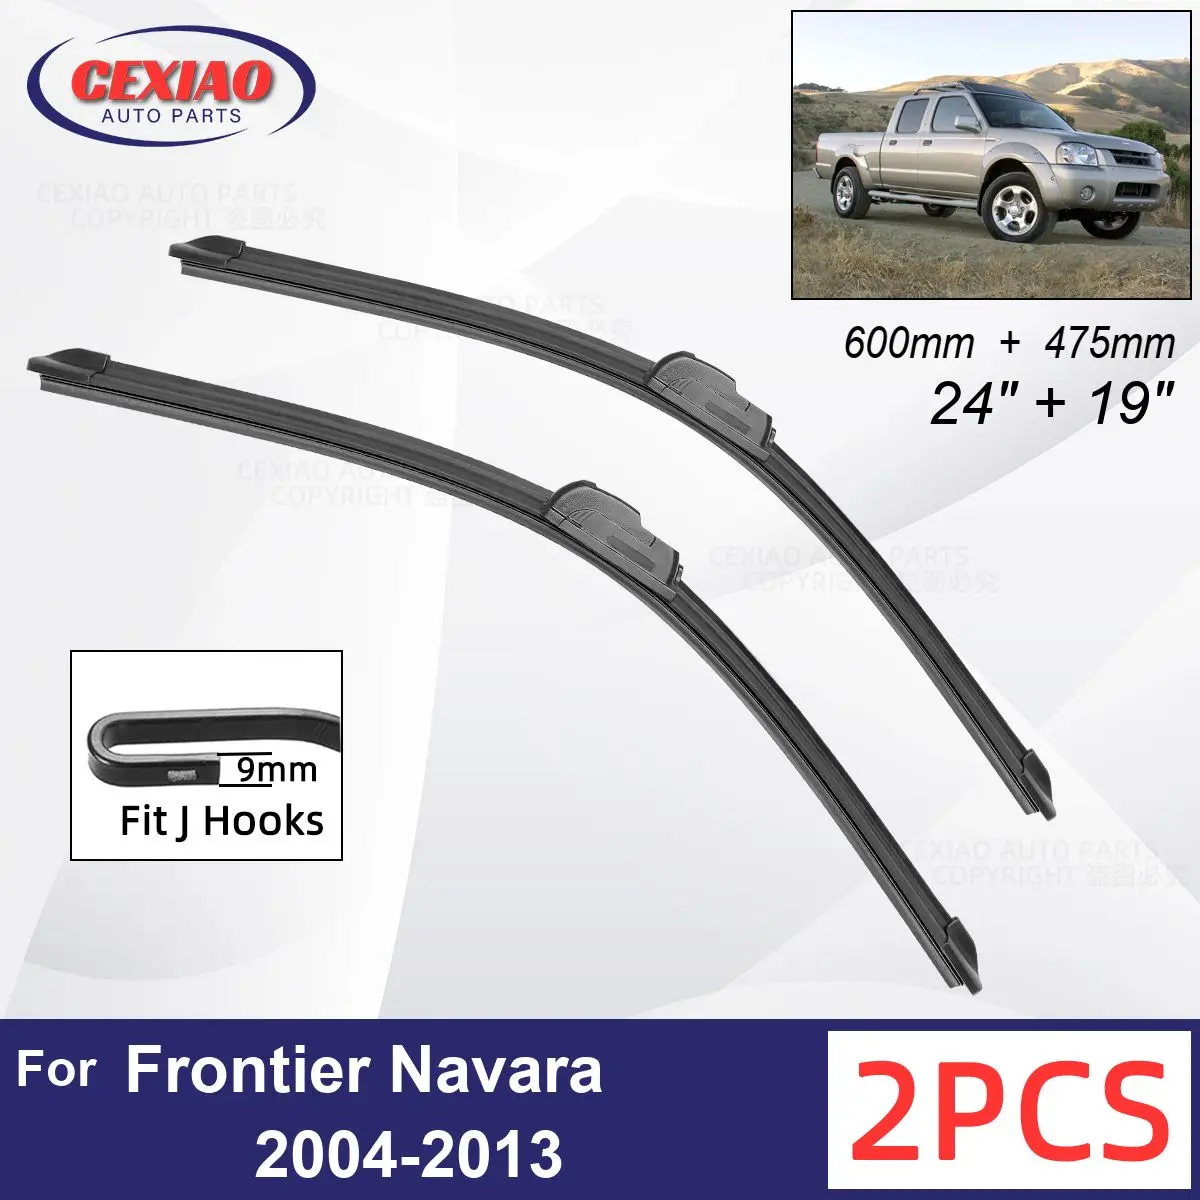 

Car Wiper For Nissan Frontier Navara Brute D40 2004-2013 Front Wiper Blades Soft Rubber Windscreen Wipers Auto Windshield